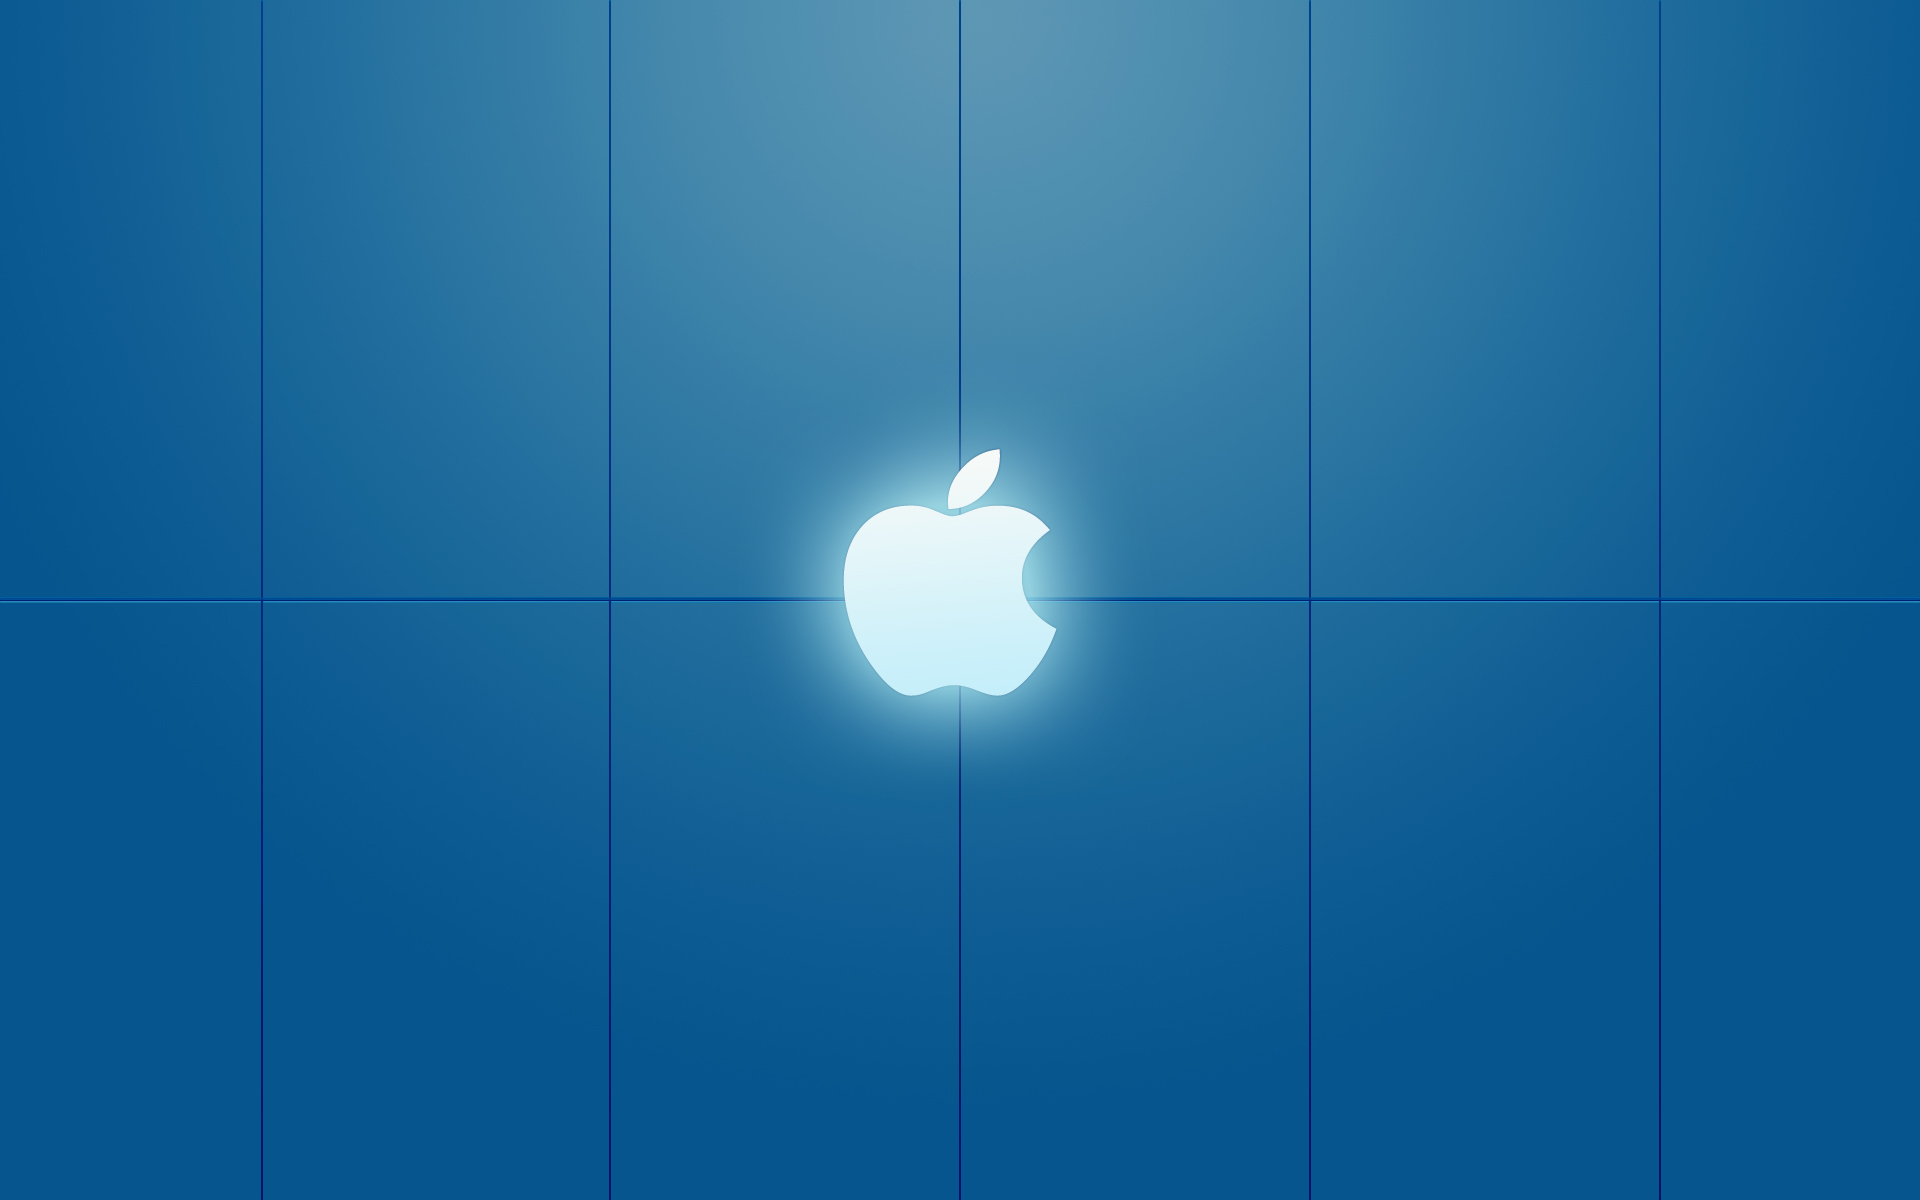 Apple Logo on Blue Background Wallpapers - 1920x1200 - 222592